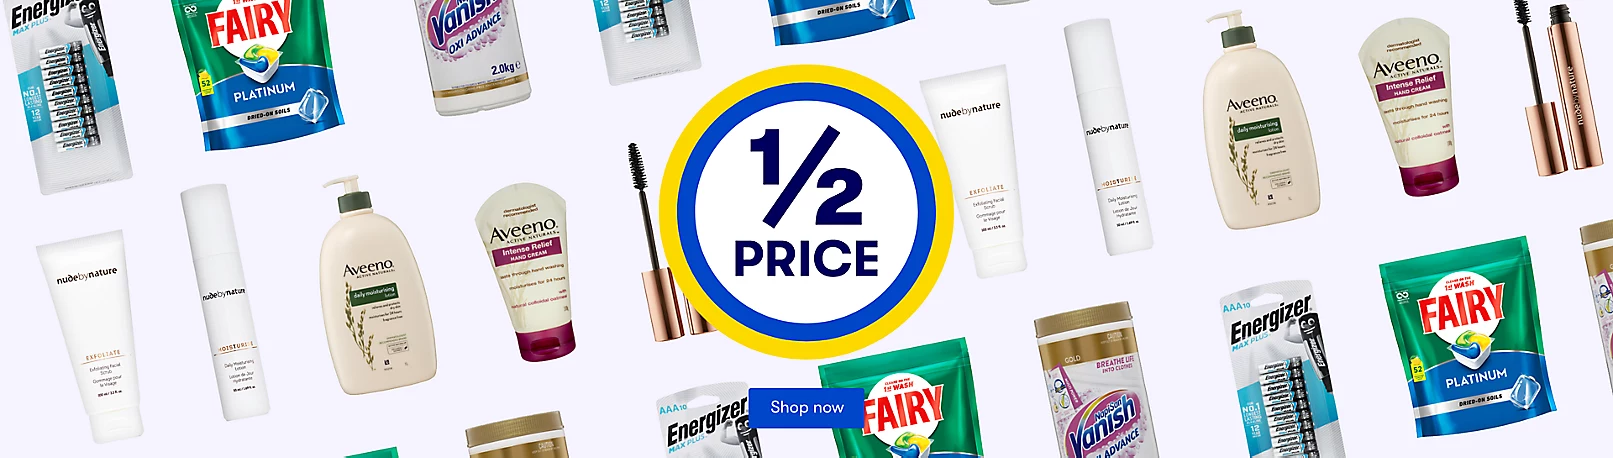 Score 50% OFF on gaming, gifts, baby, cleaning & household essentials @ Big W